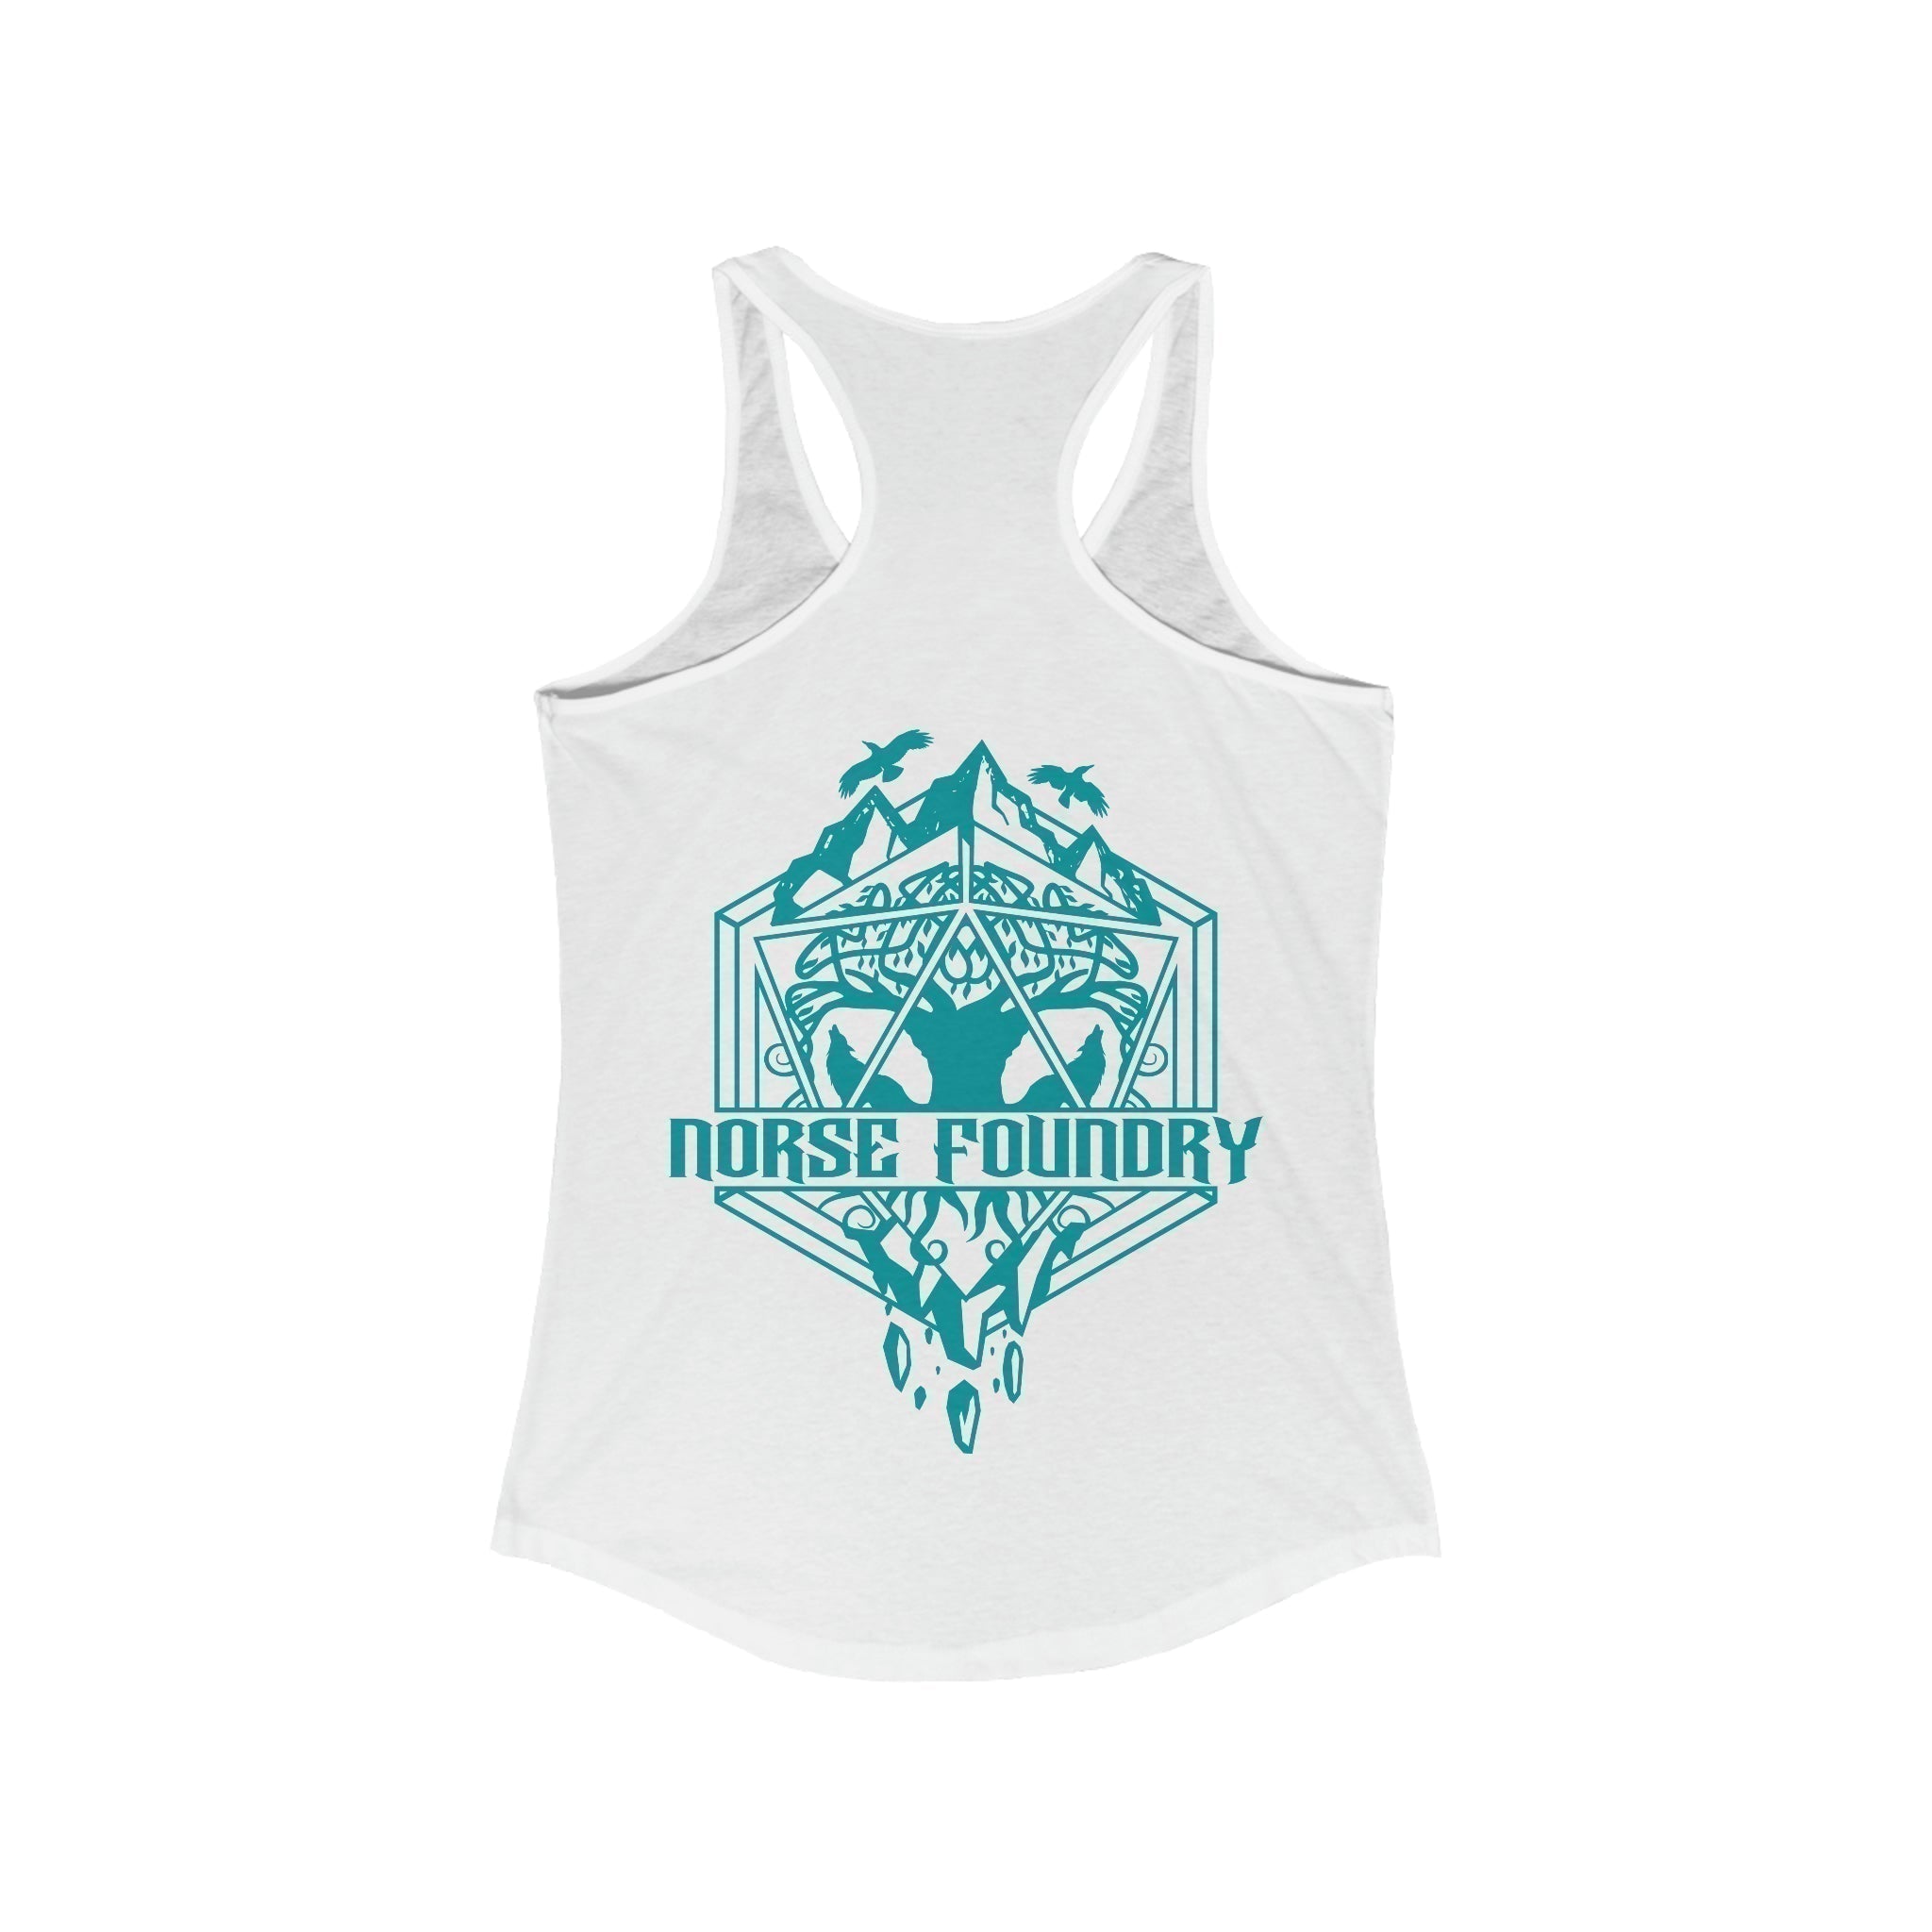 Roll for Adventure - Norse Foundry Women's Tank Top - 27572472430833989550